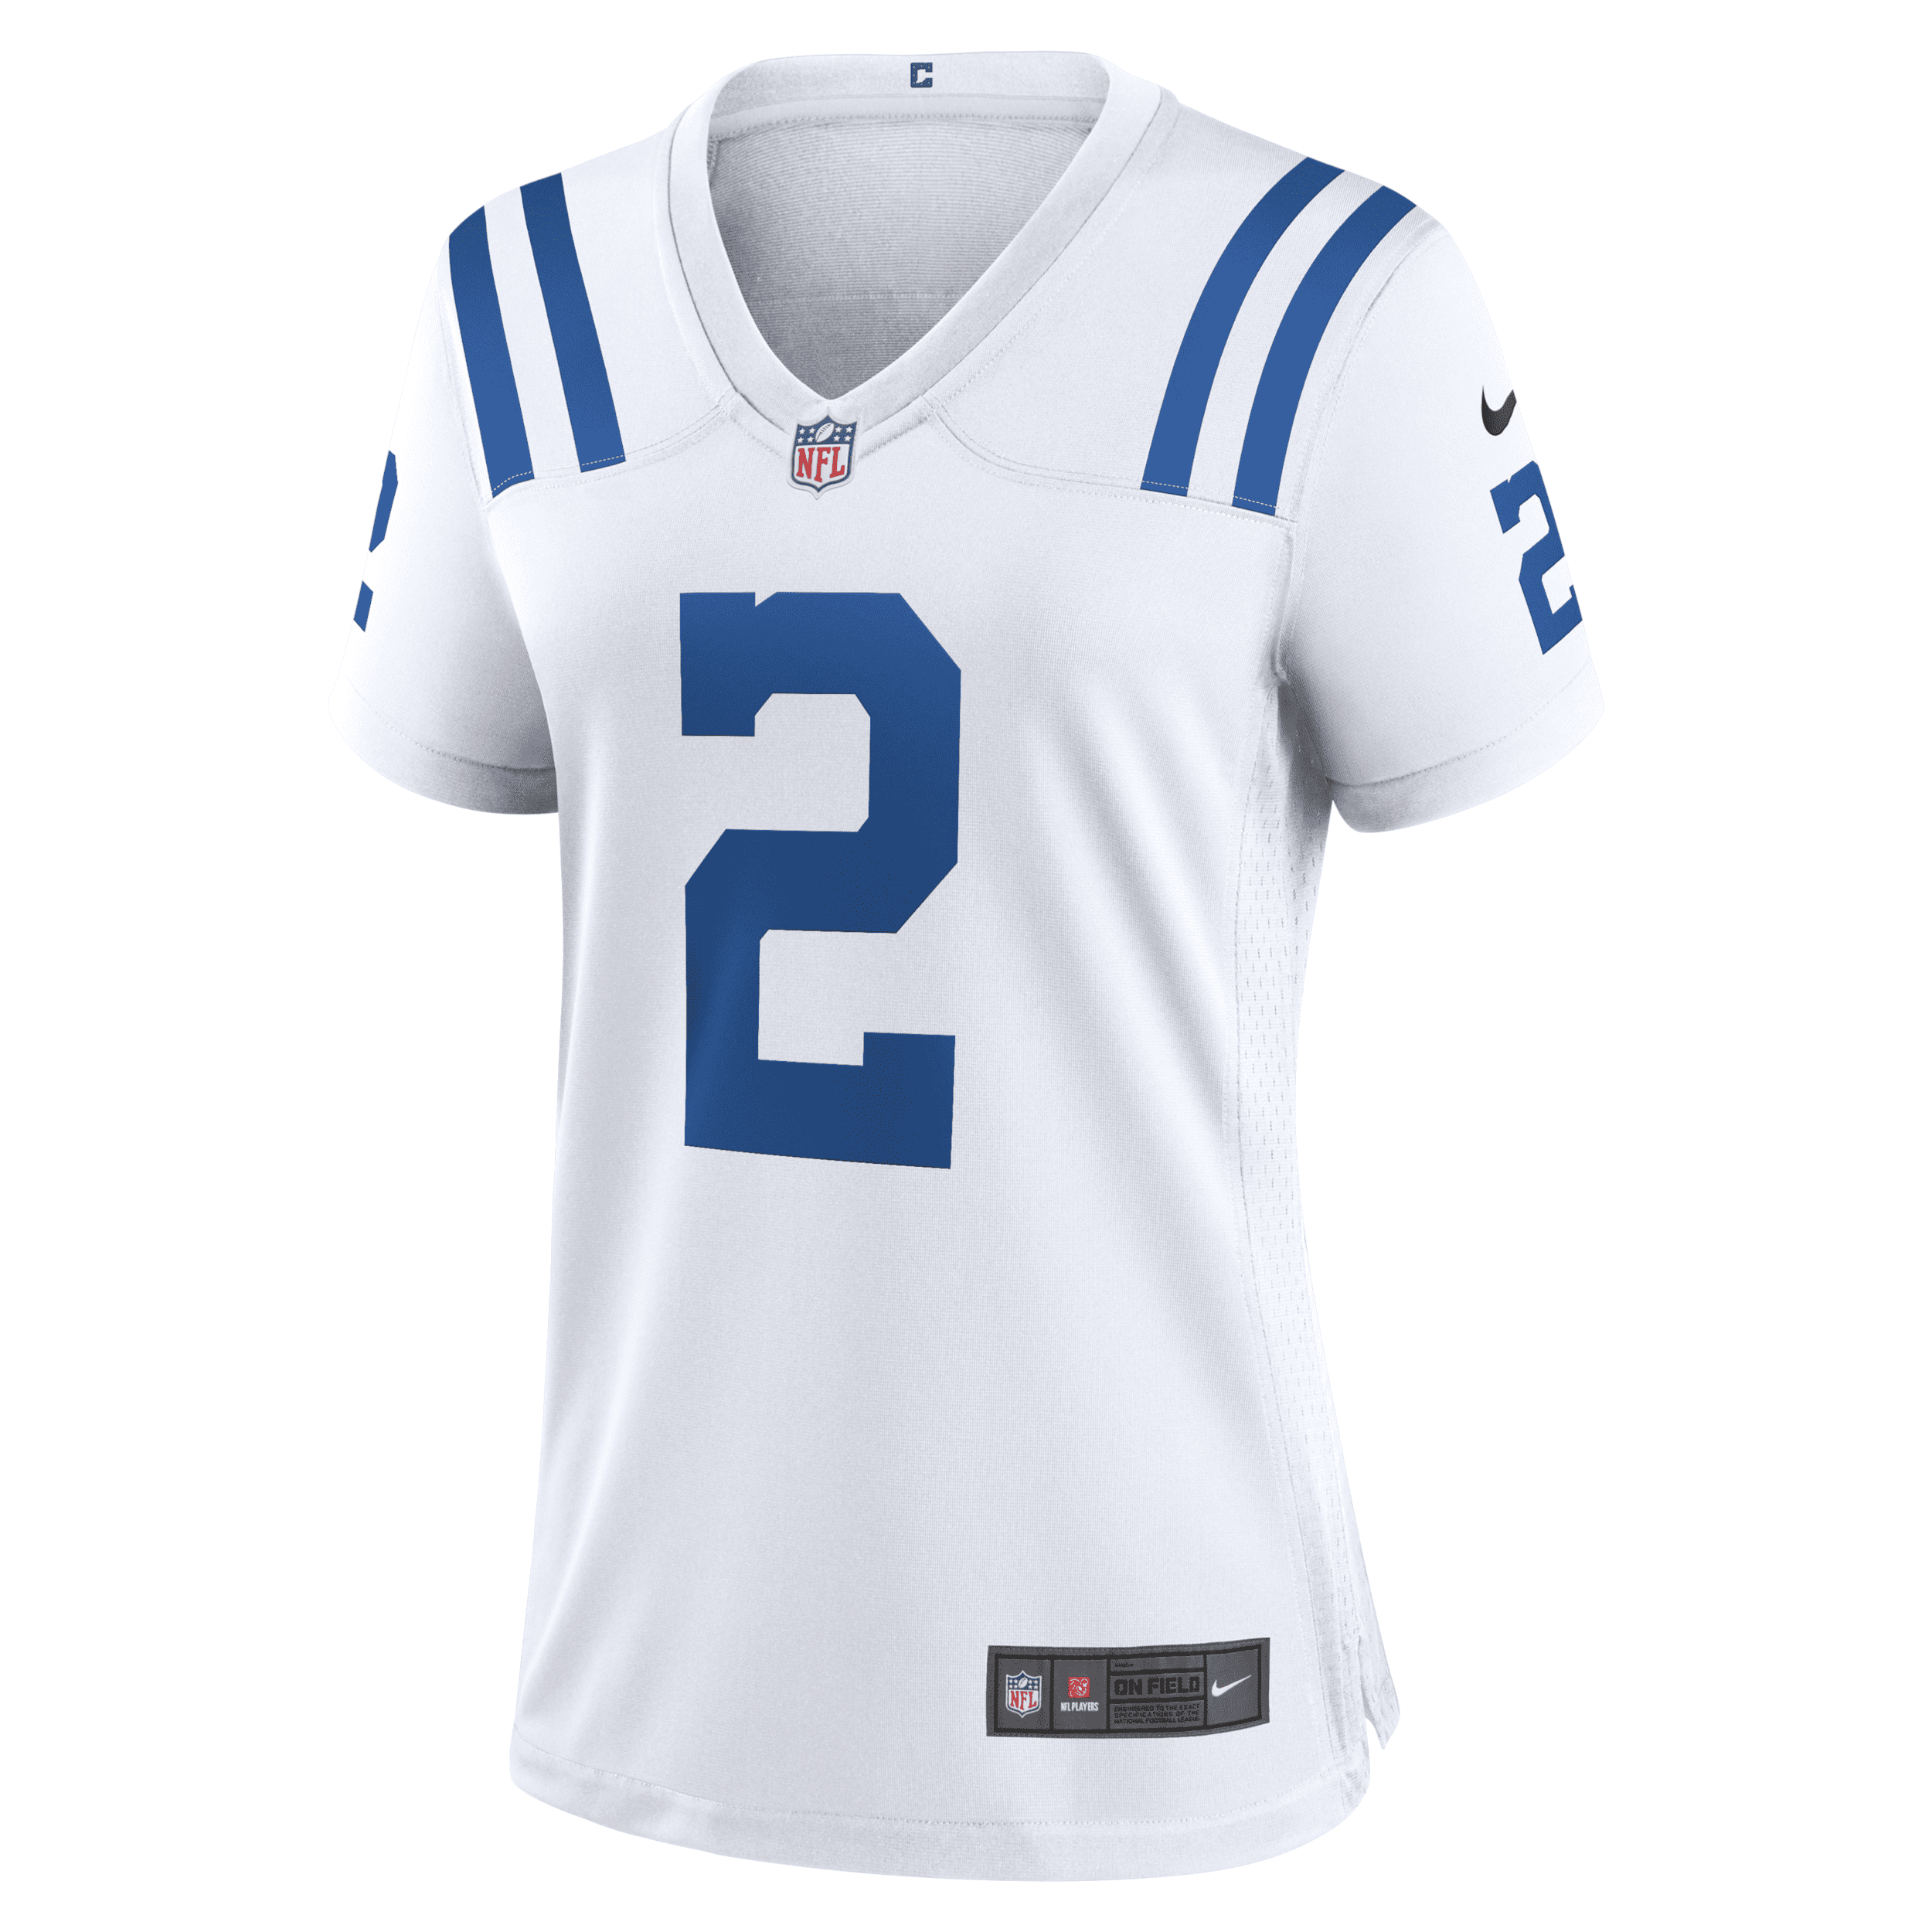 Shop Nike Women's Nfl Indianapolis Colts (carson Wentz) Game Football Jersey In White